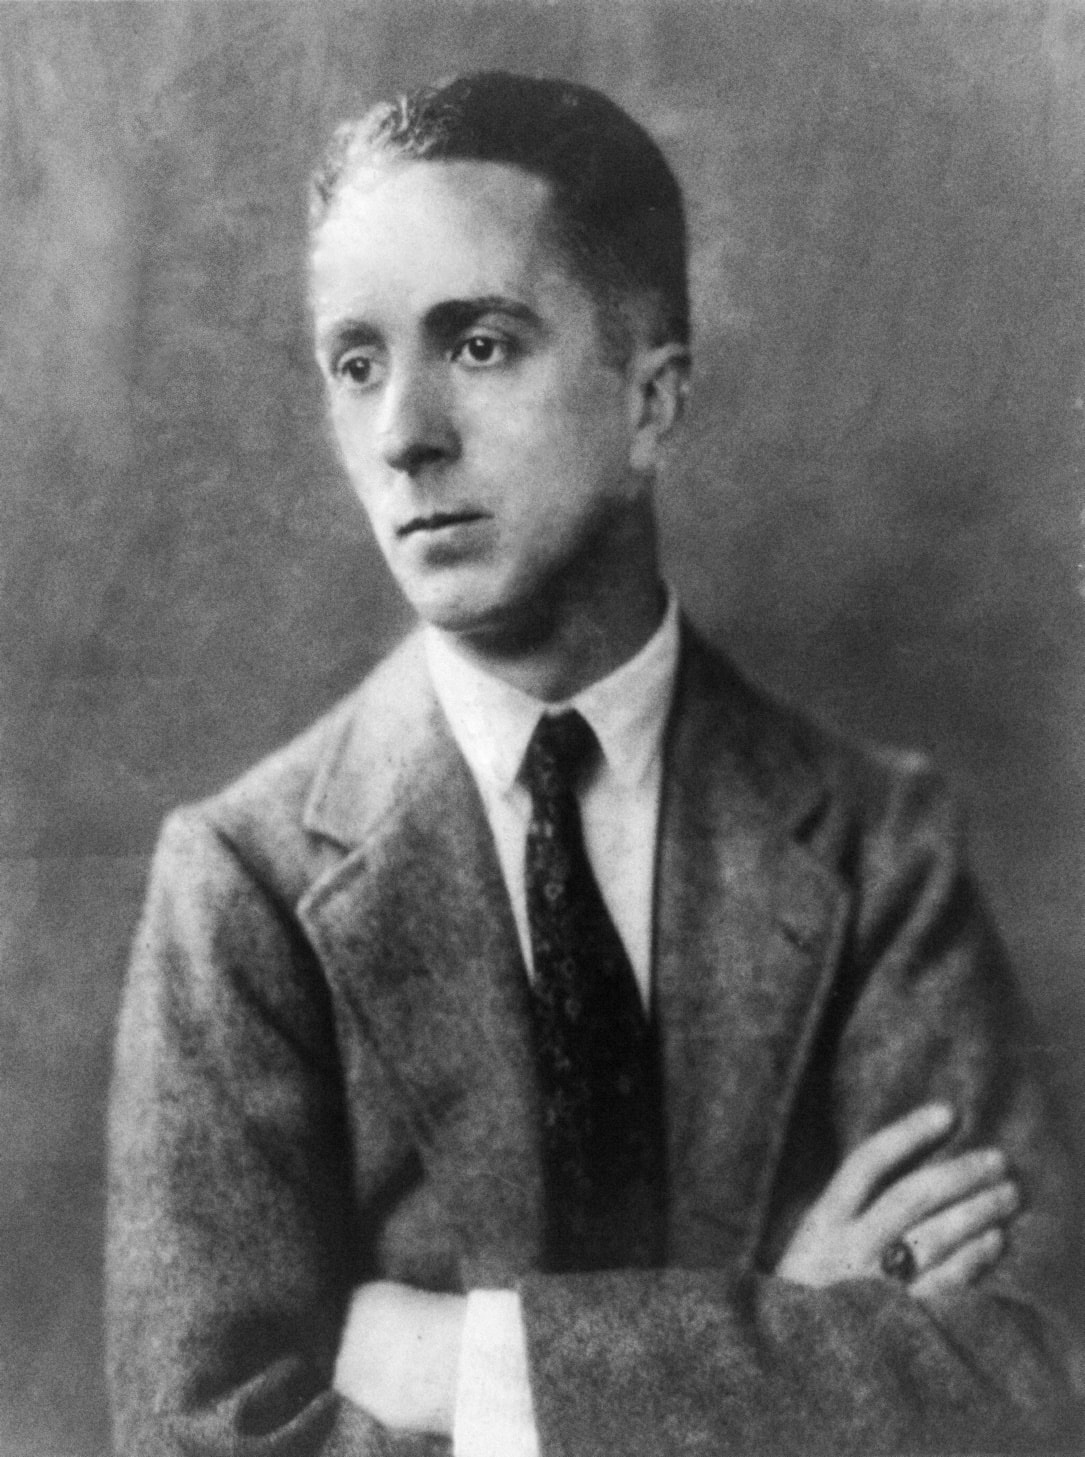 Norman Rockwell, ca. 1921